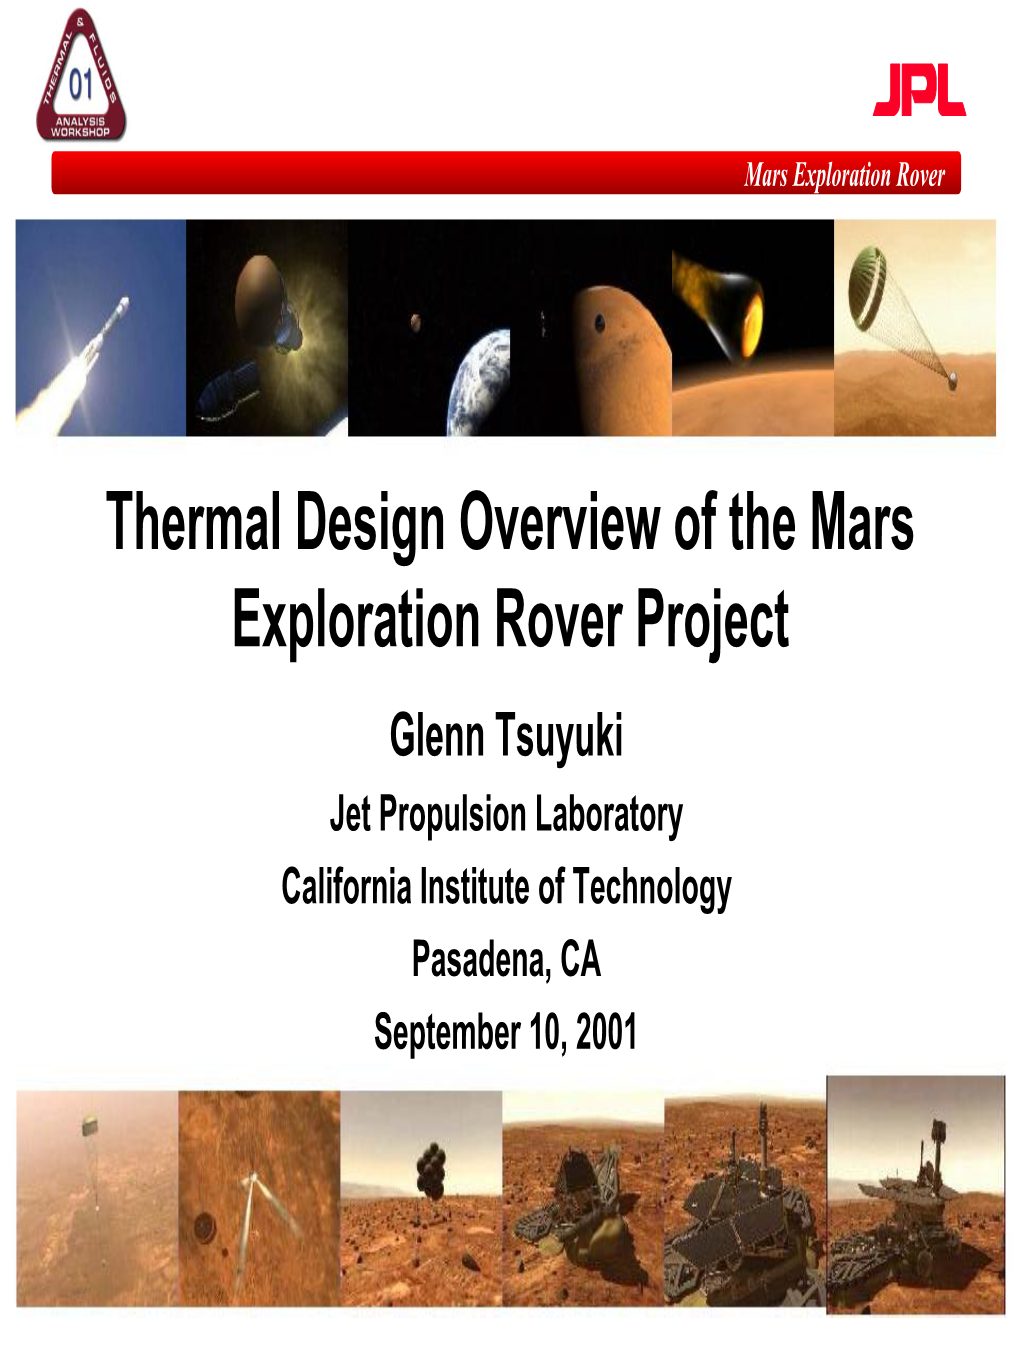 Thermal Design Overview of the Mars Exploration Rover Project